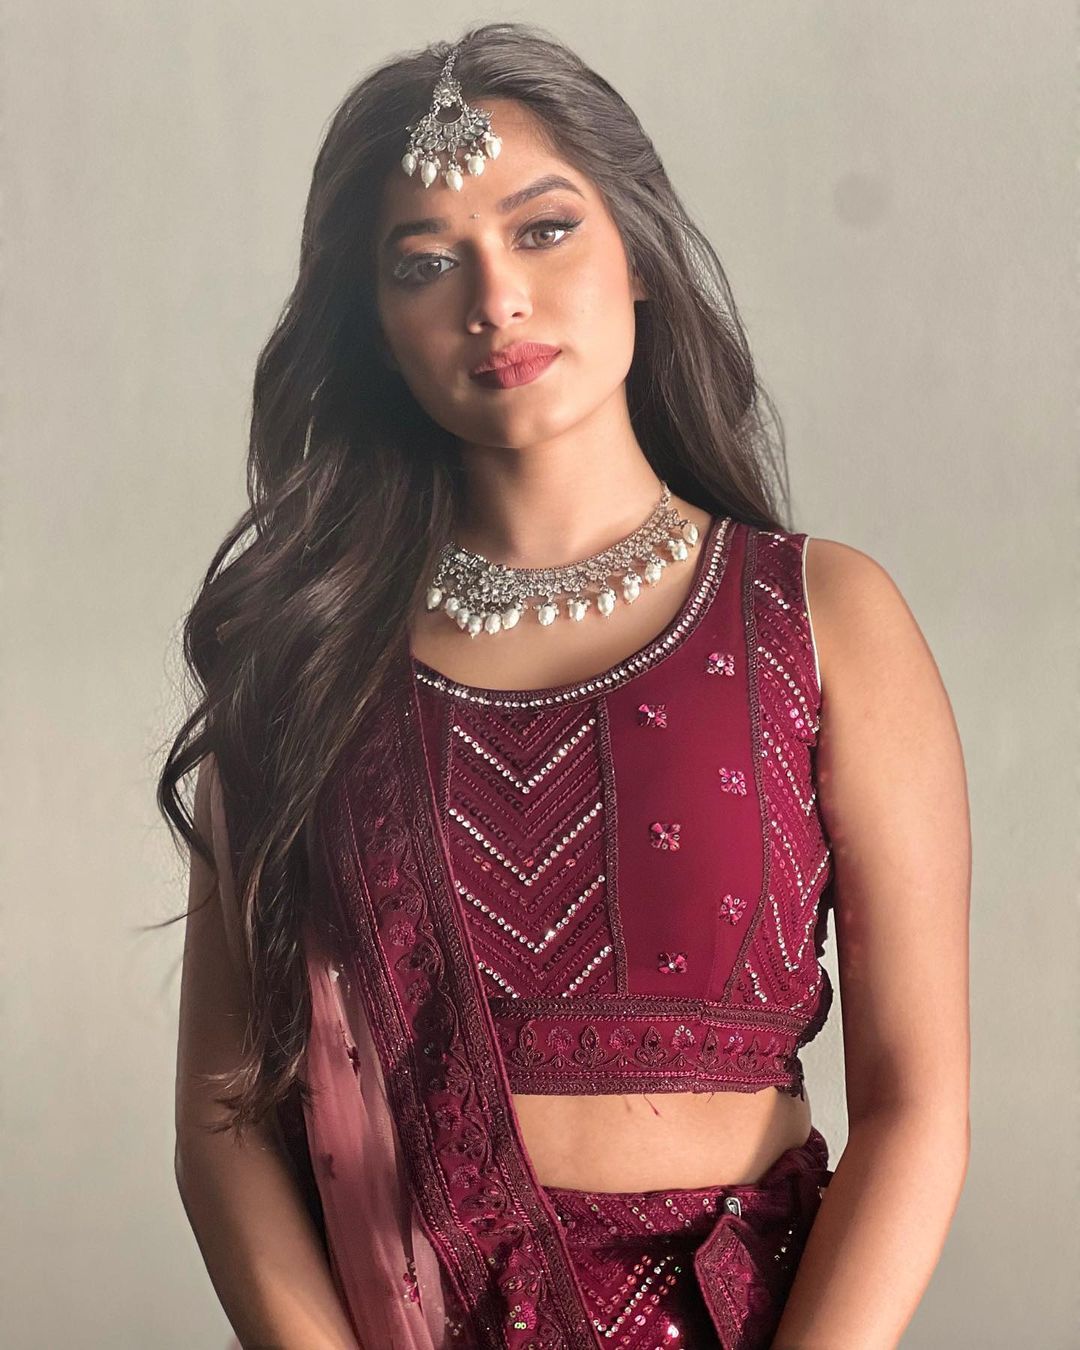 From Anushka Sen, Avneet Kaur to Jannat Zubair Rahmani: The traditional looks of these actresses rocked the hearts of fans 9596